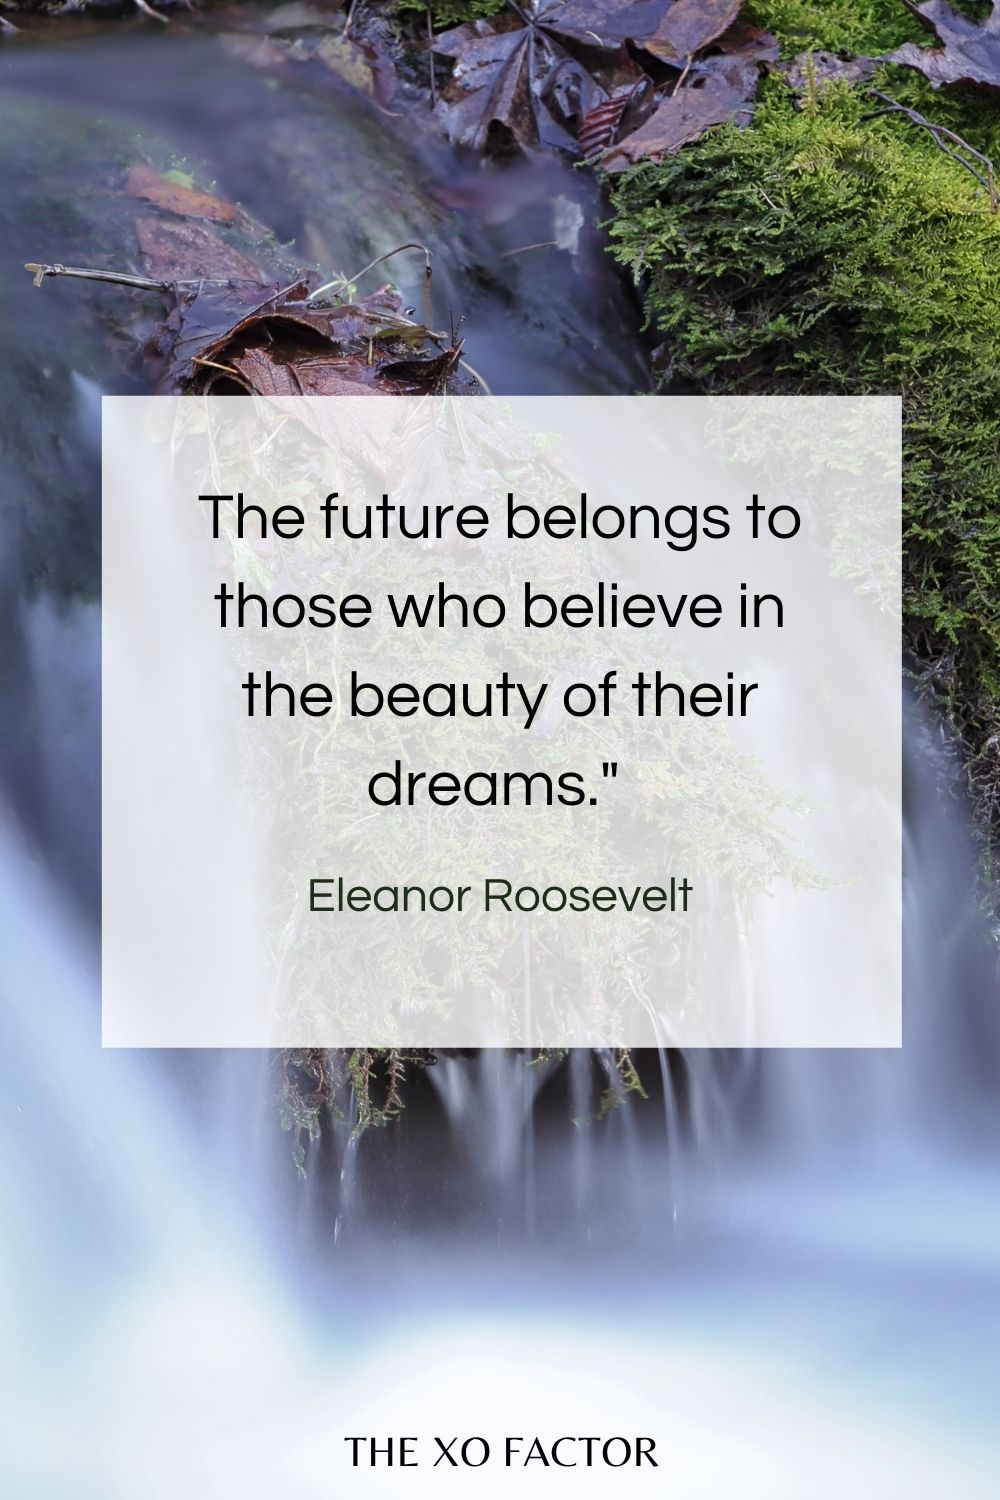 The future belongs to those who believe in the beauty of their dreams."  Eleanor Roosevelt